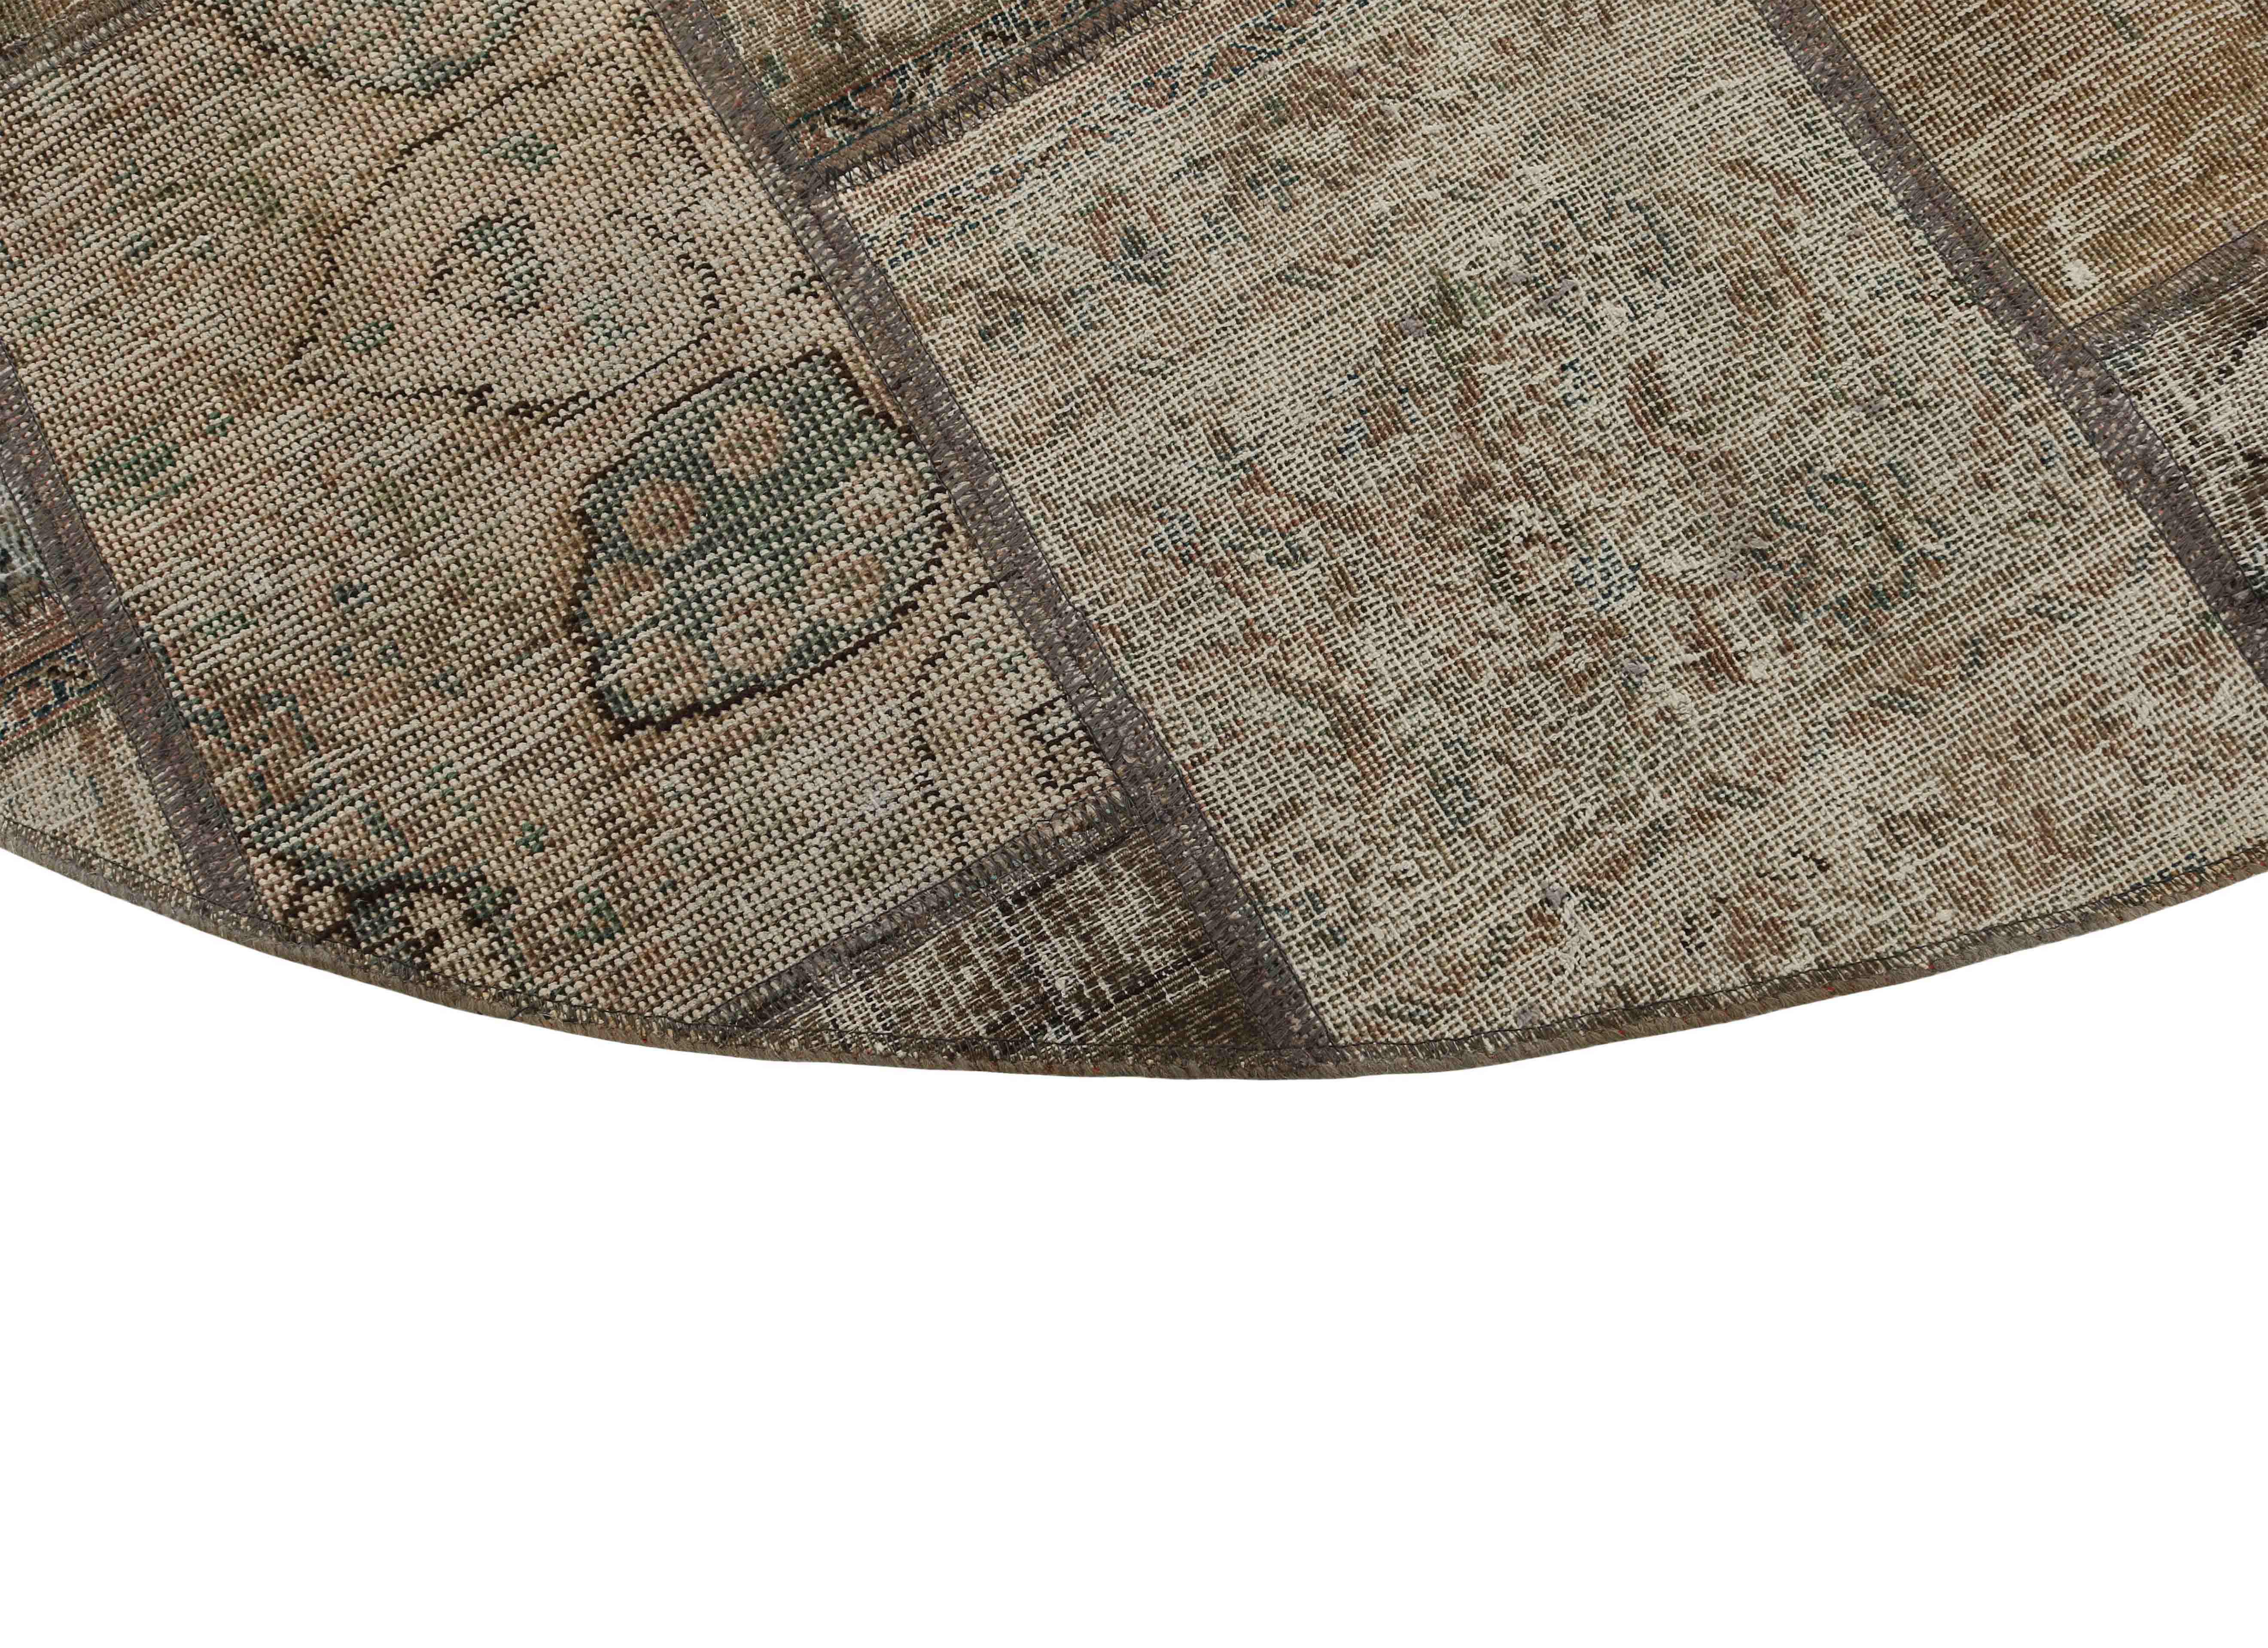 Authentic brown patchwork persian circle rug